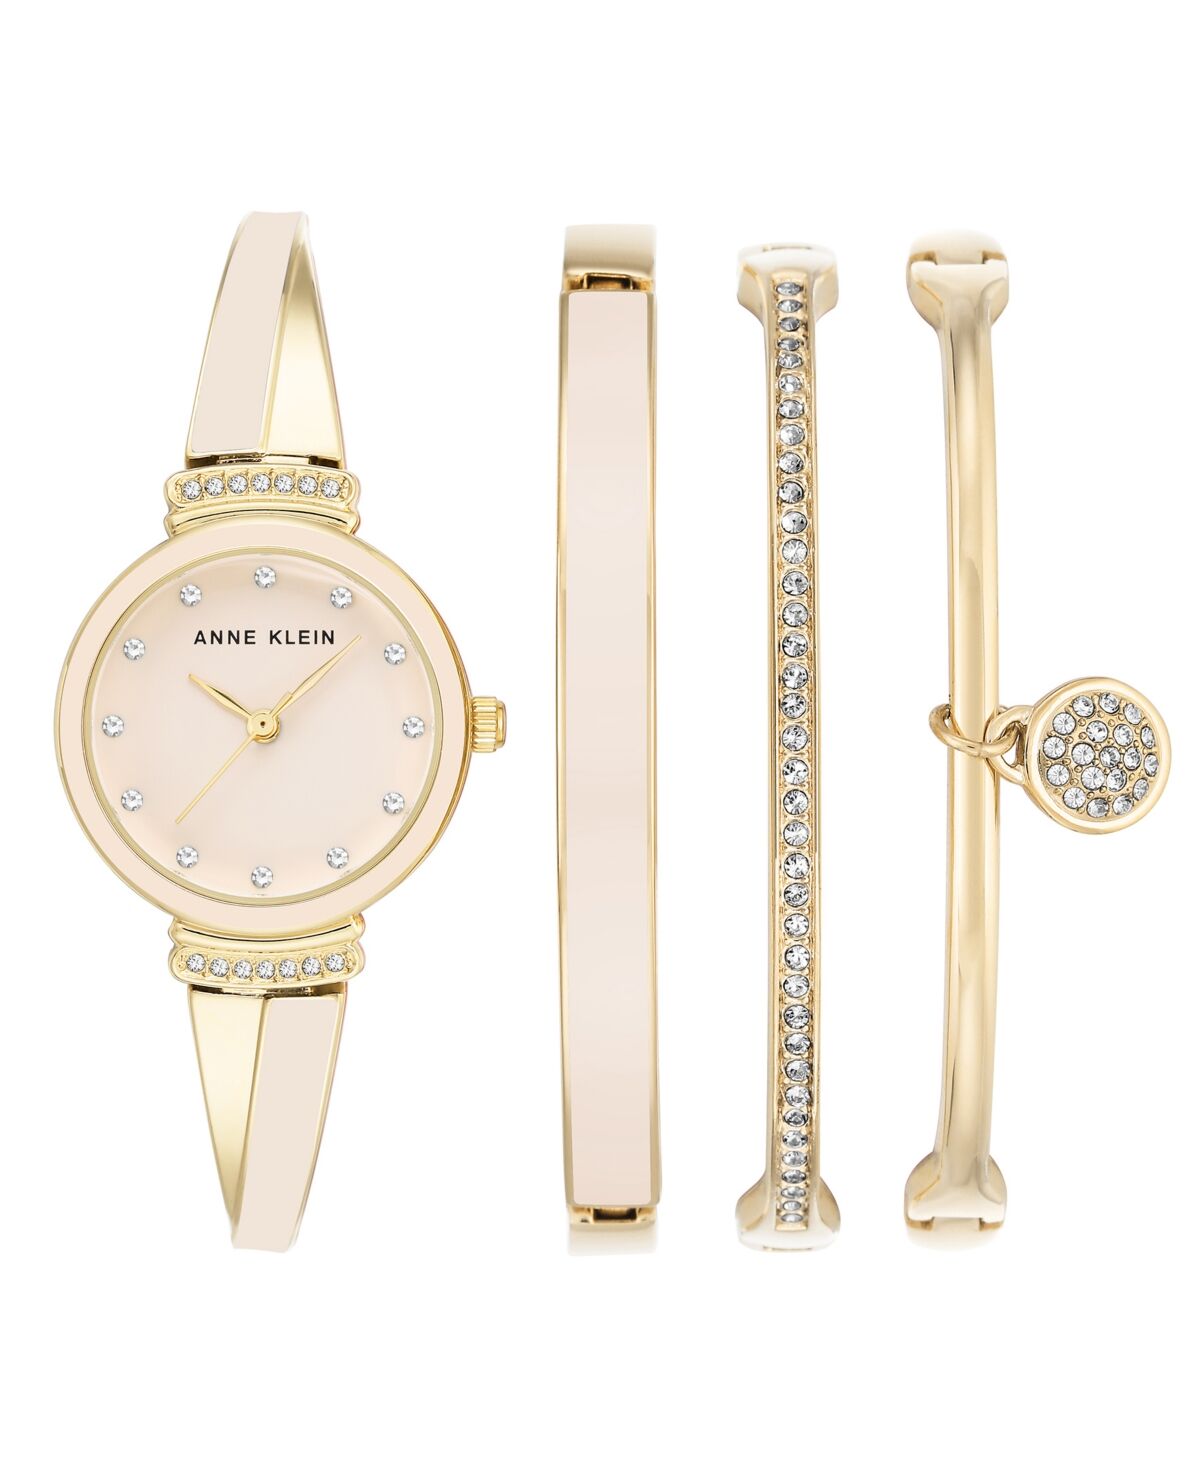 Anne Klein Women's Gold-Tone Alloy Bangle with Pink Enamel Fashion Watch 33.5mm and Bracelet Set - Pink, Gold-Tone